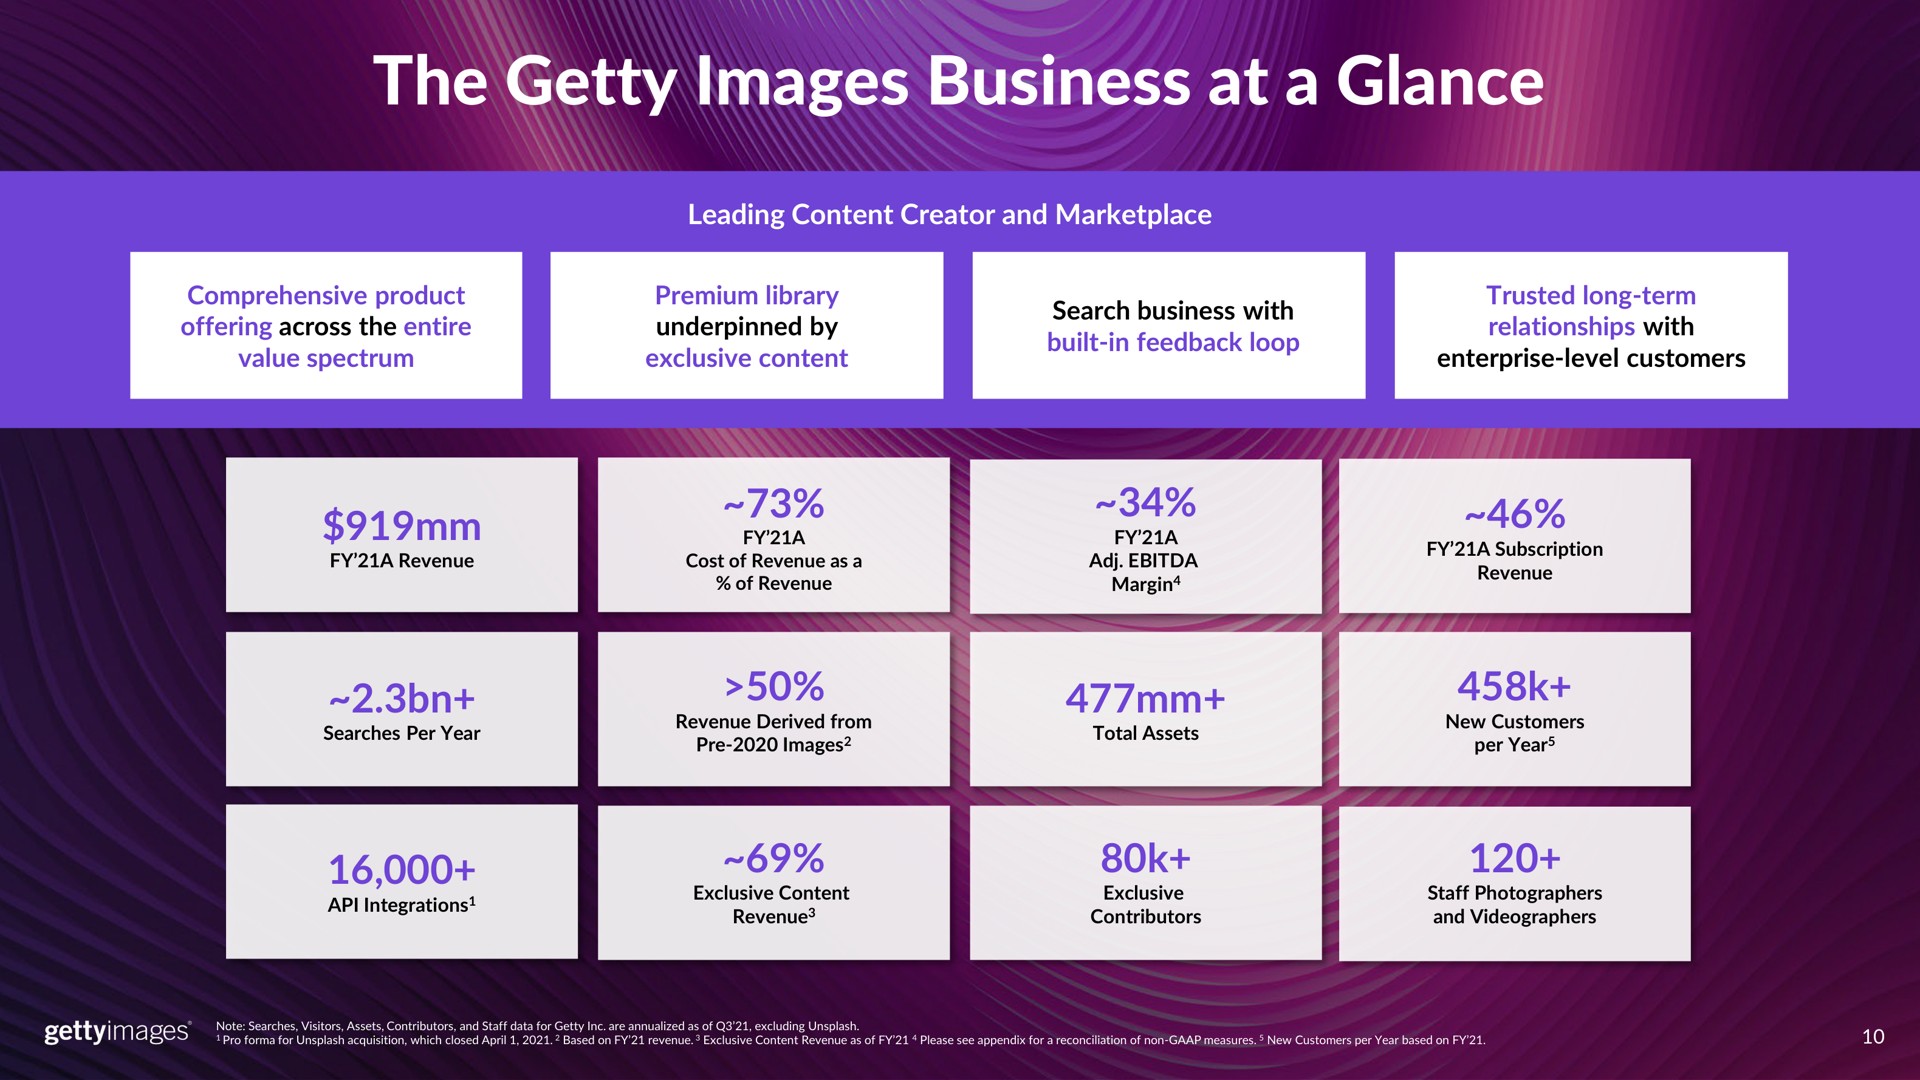 the images business at a glance | Getty